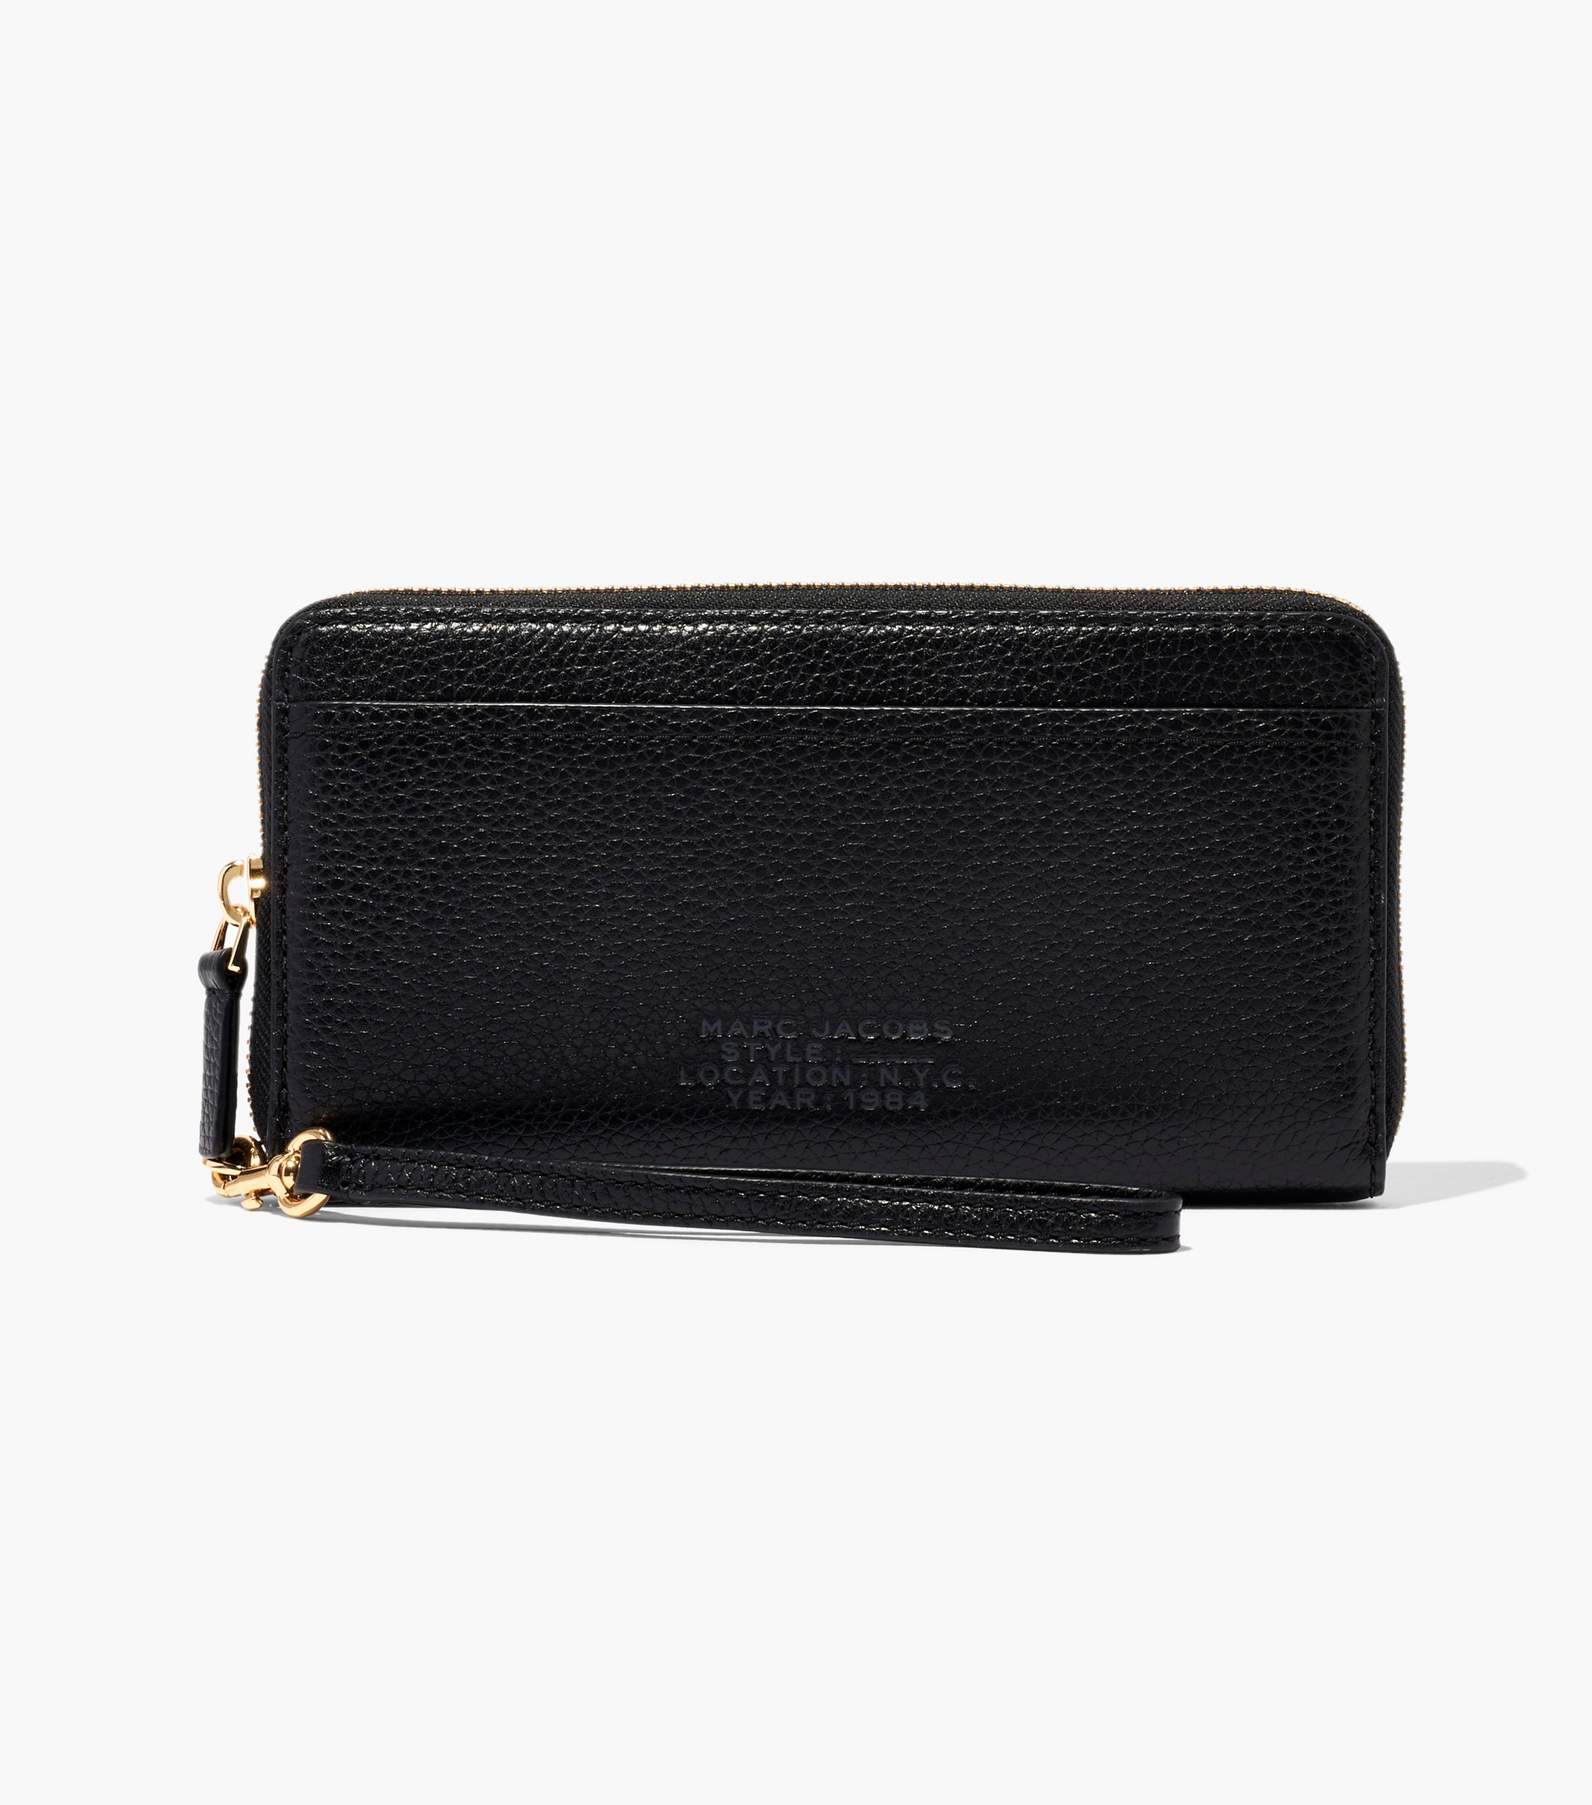 MARC JACOBS The Continental Wallet Black